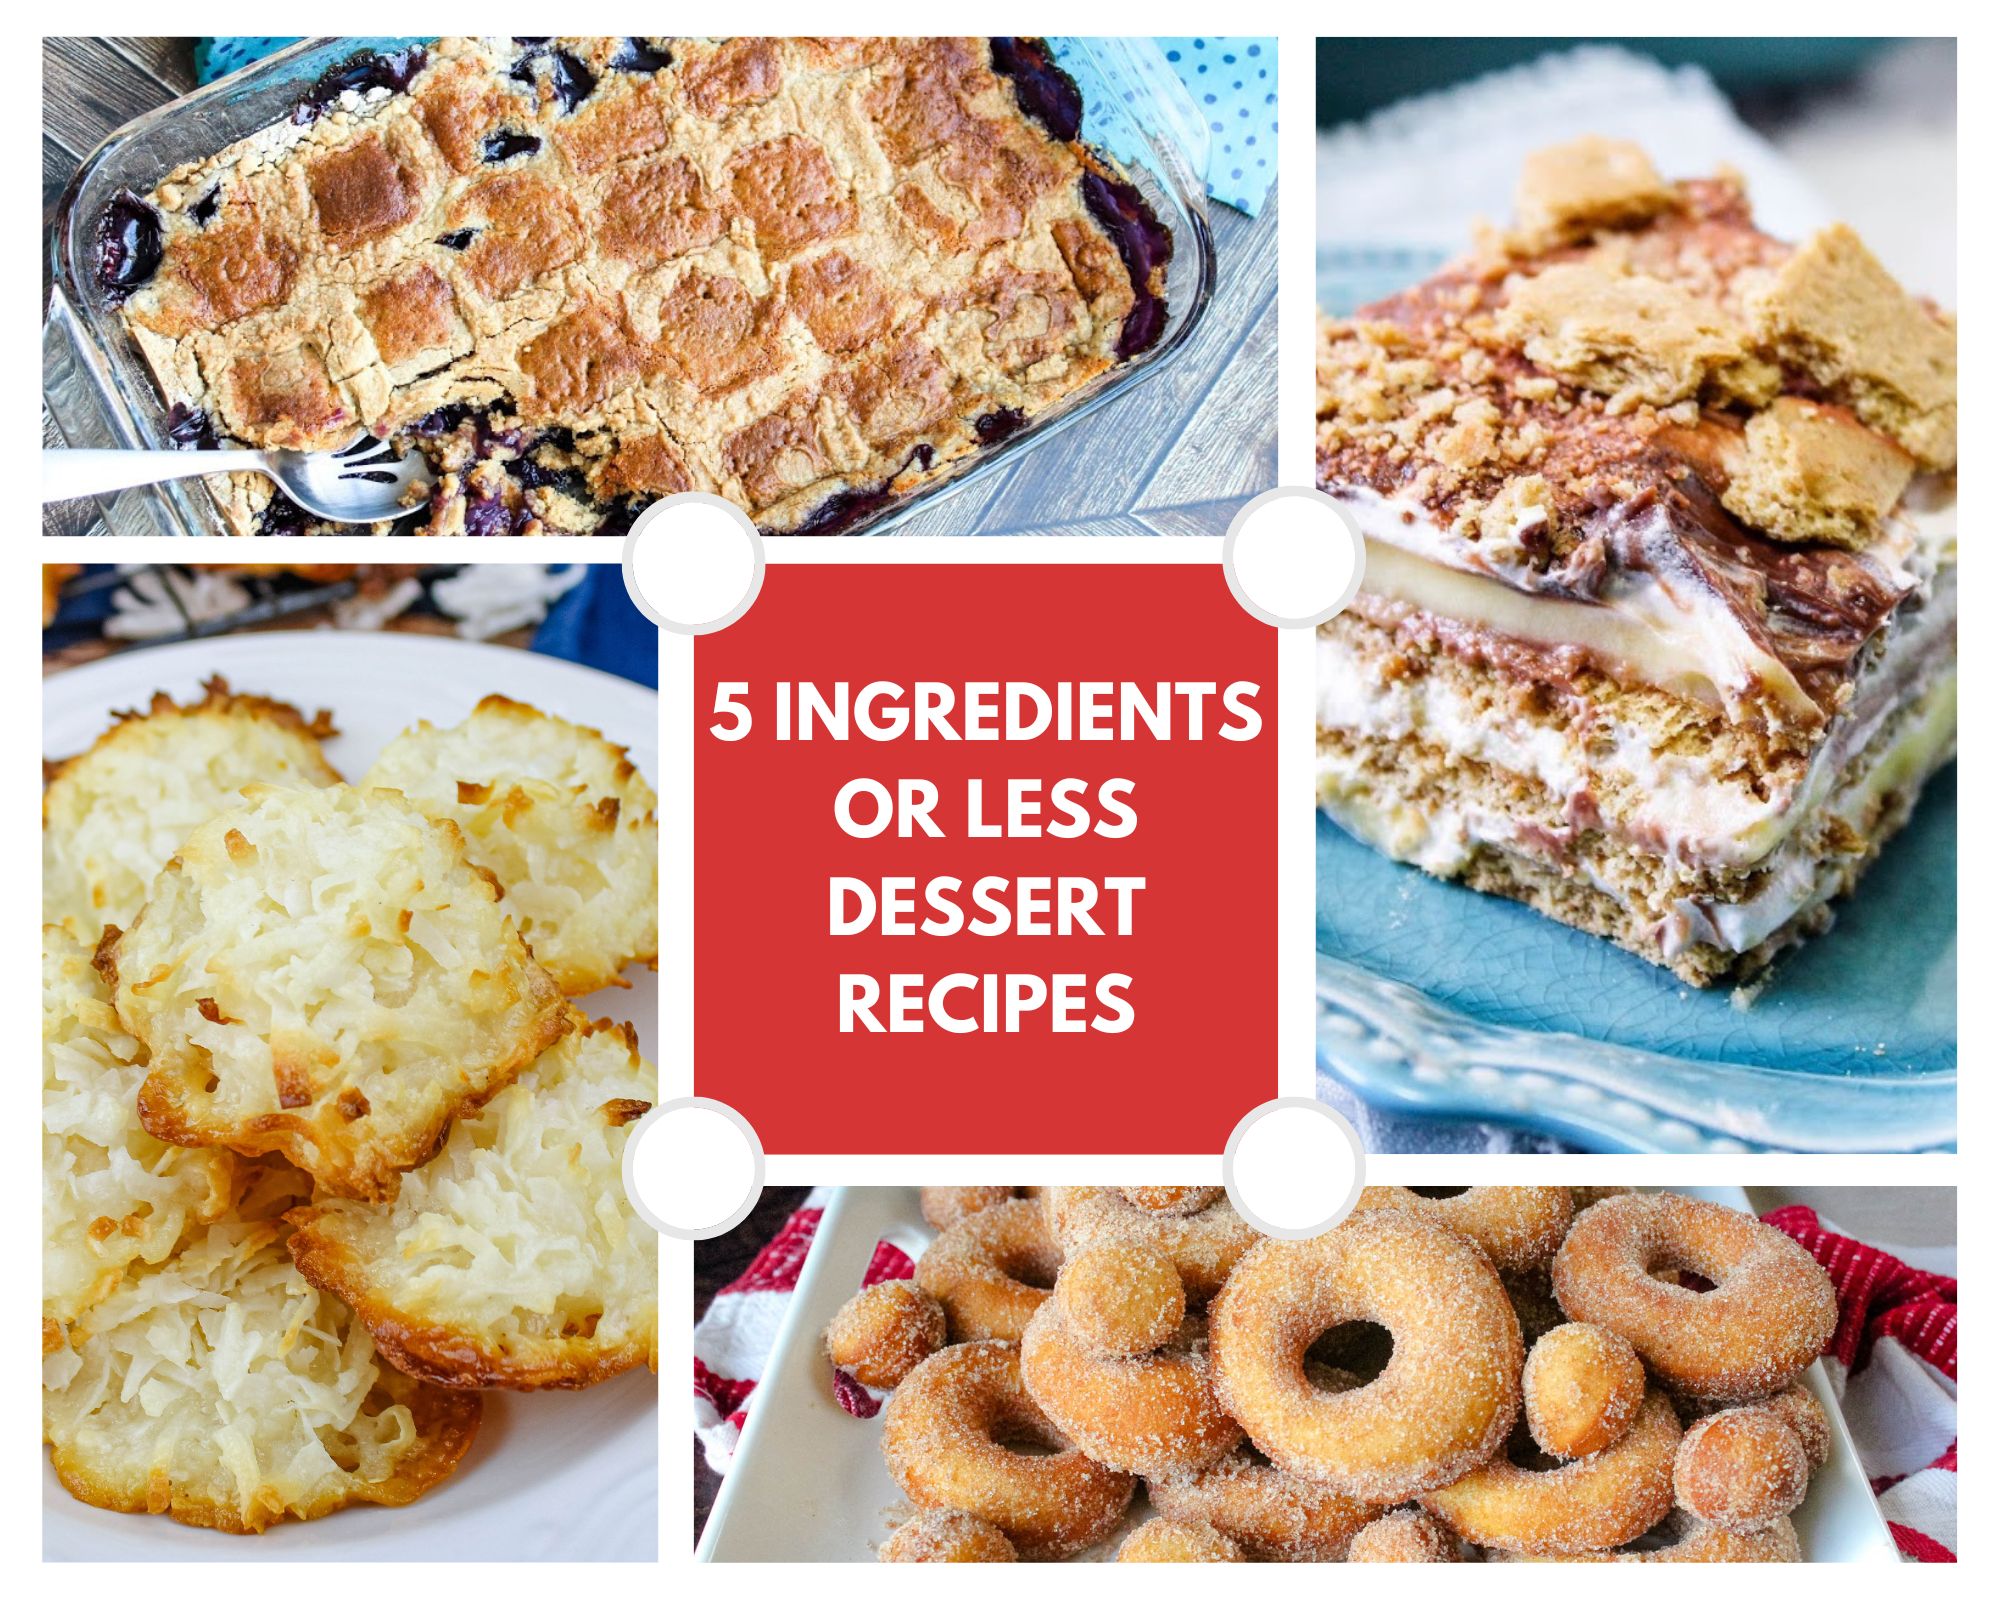 Five Ingredients or Less Dessert Recipes